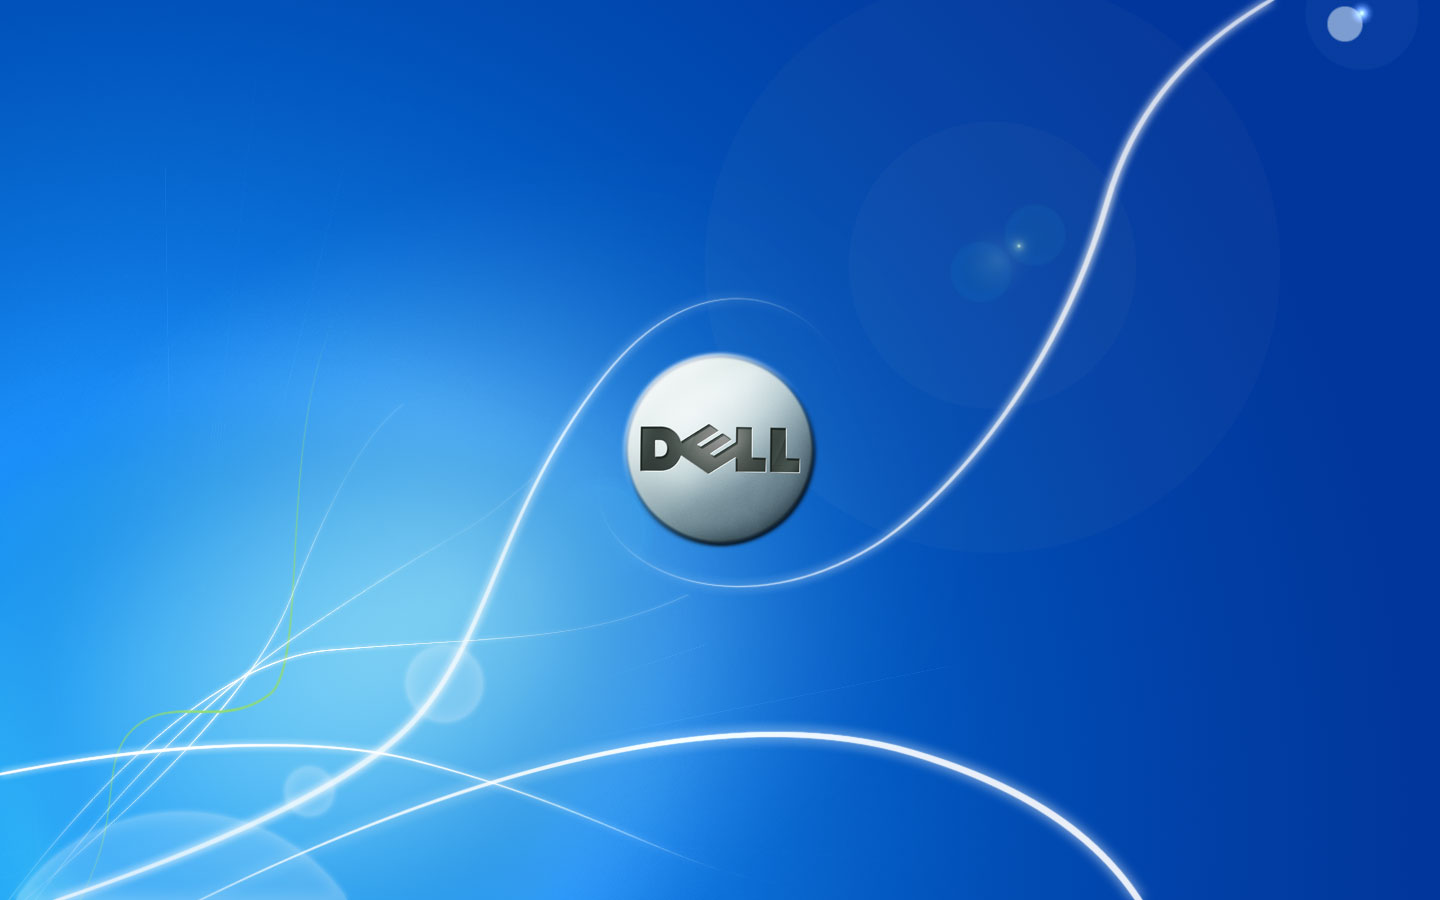 Free Download Dell Wallpaper Backgrounds 1440x900 For Your Desktop Mobile Tablet Explore 49 Dell Windows 7 Wallpaper Download Dell Windows 7 Desktop Wallpaper Dell Wallpaper Windows 10 Dell Xps Wallpaper Windows 7